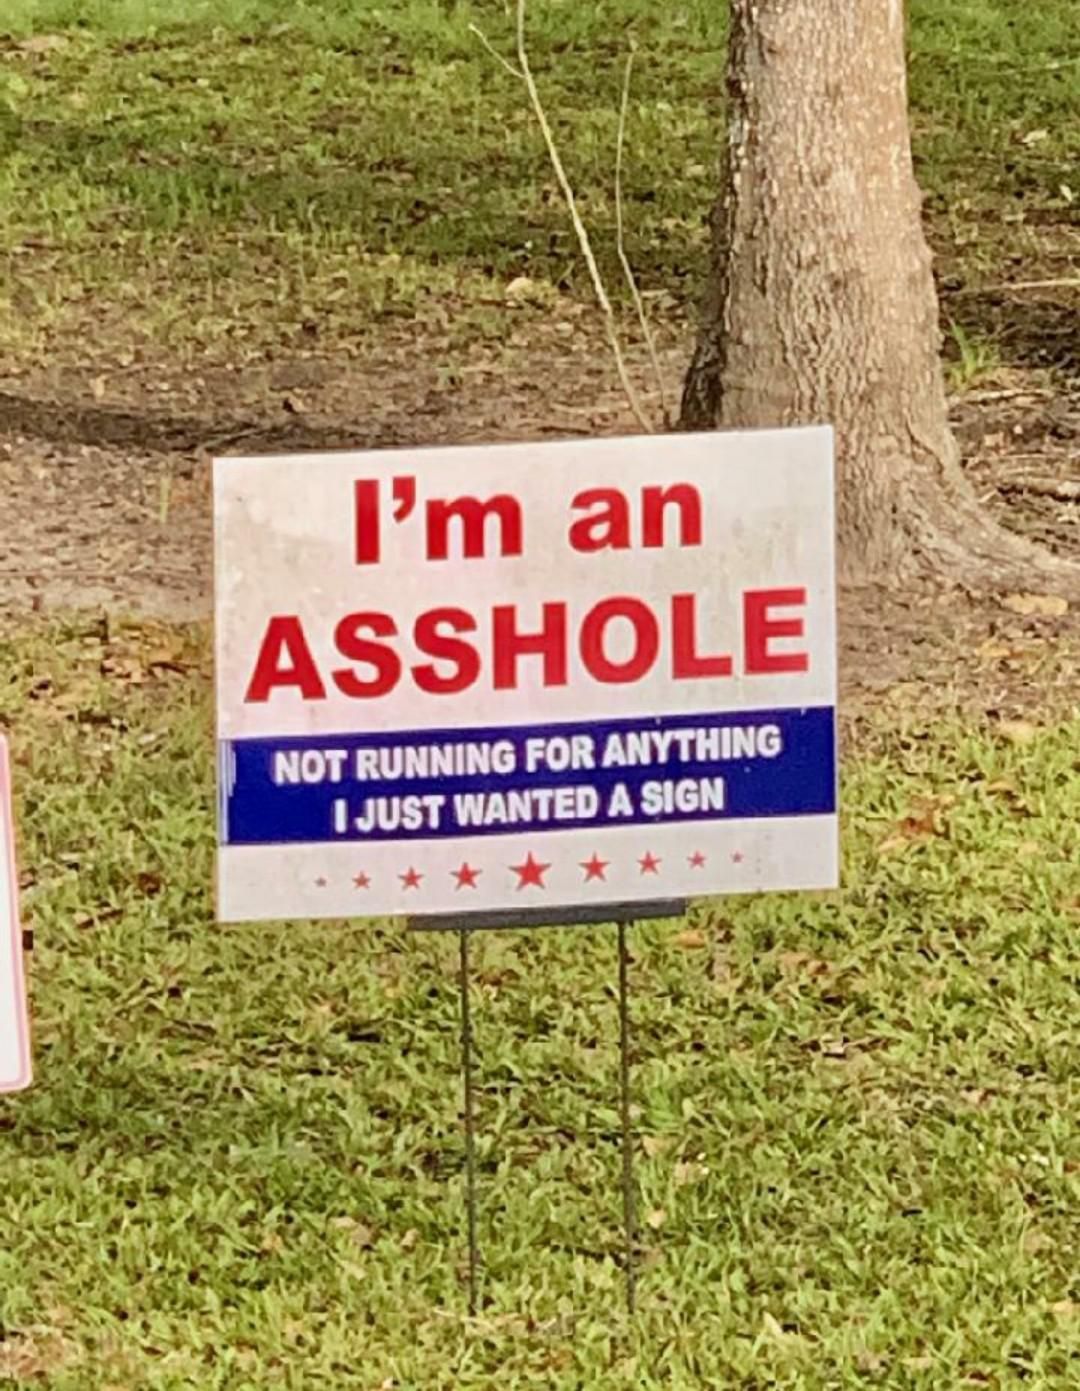 Saw this gem in a yard in Houston.